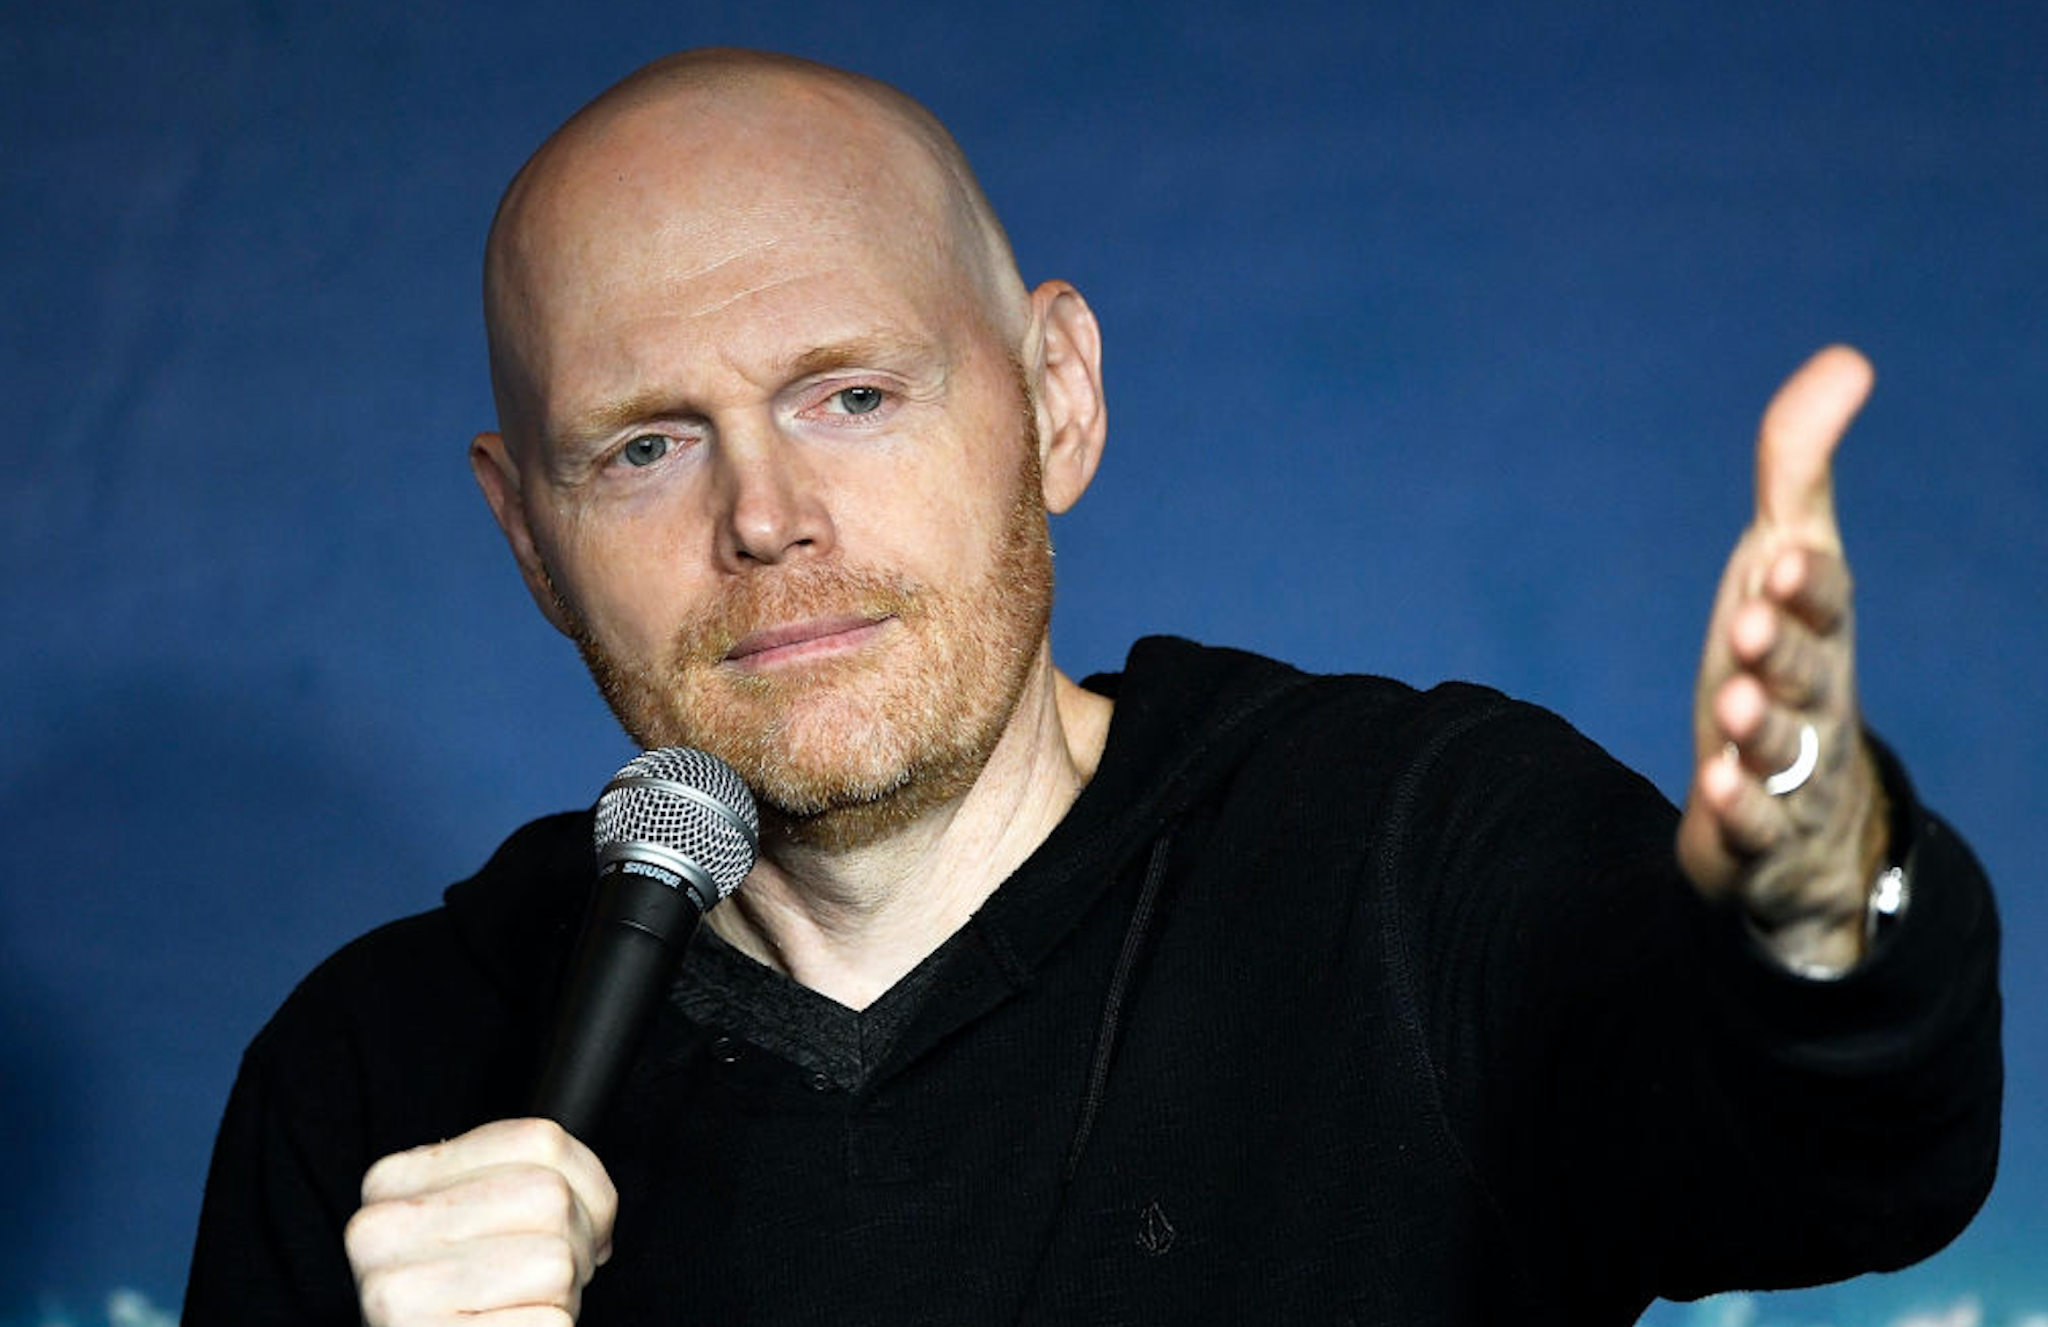 Bill Burr Takes Another Swipe At Feminists, Women’s Sports In Latest